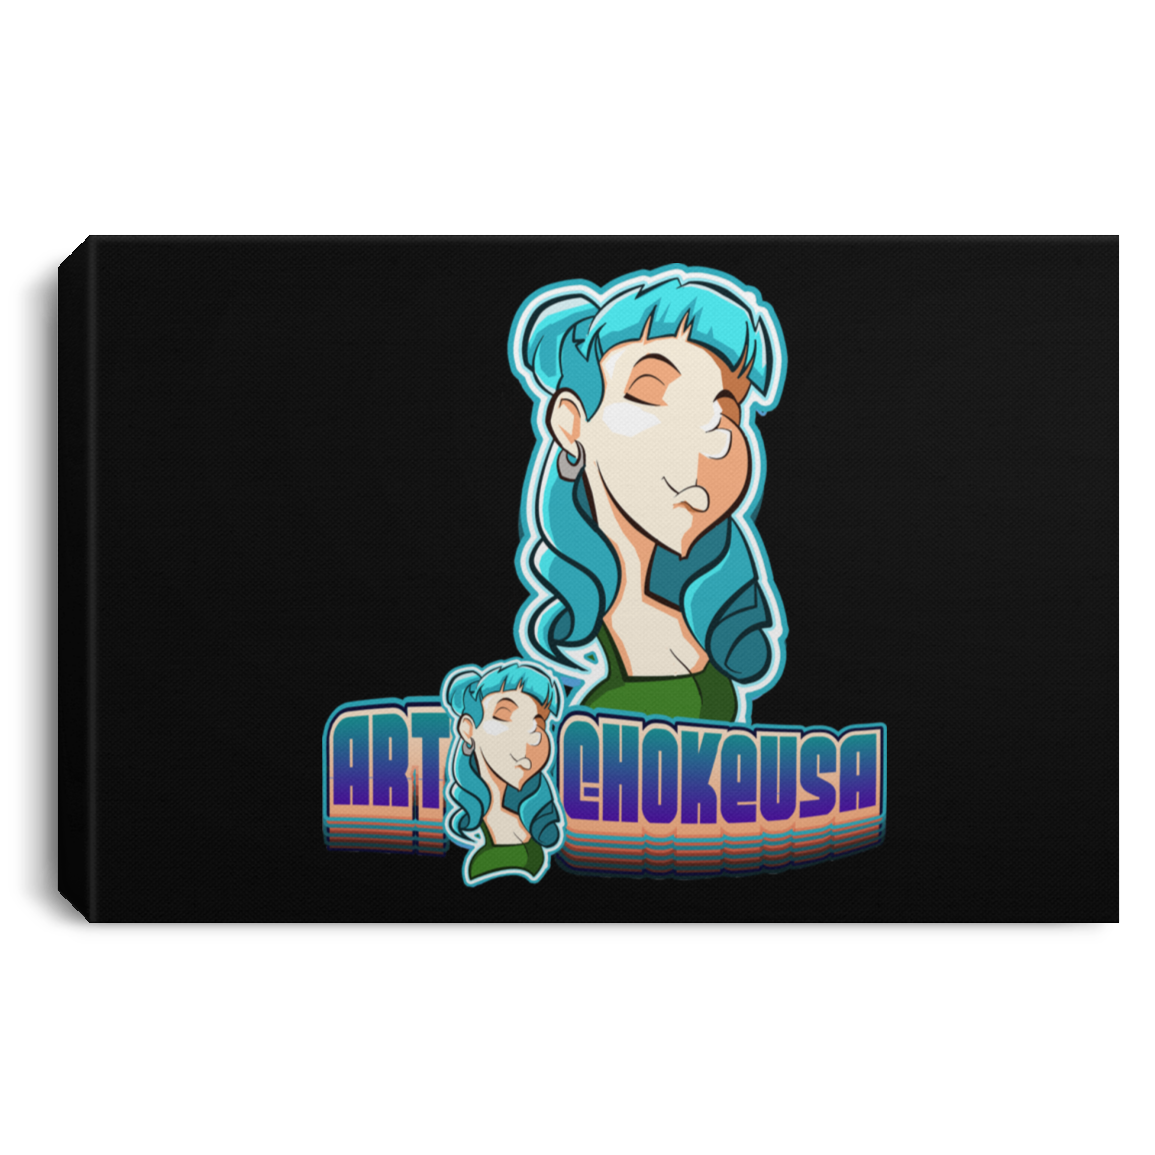 ArtichokeUSA Characters and Fonts. "Shelly" Let’s Create Your Own Design Today. Landscape Canvas .75in Frame